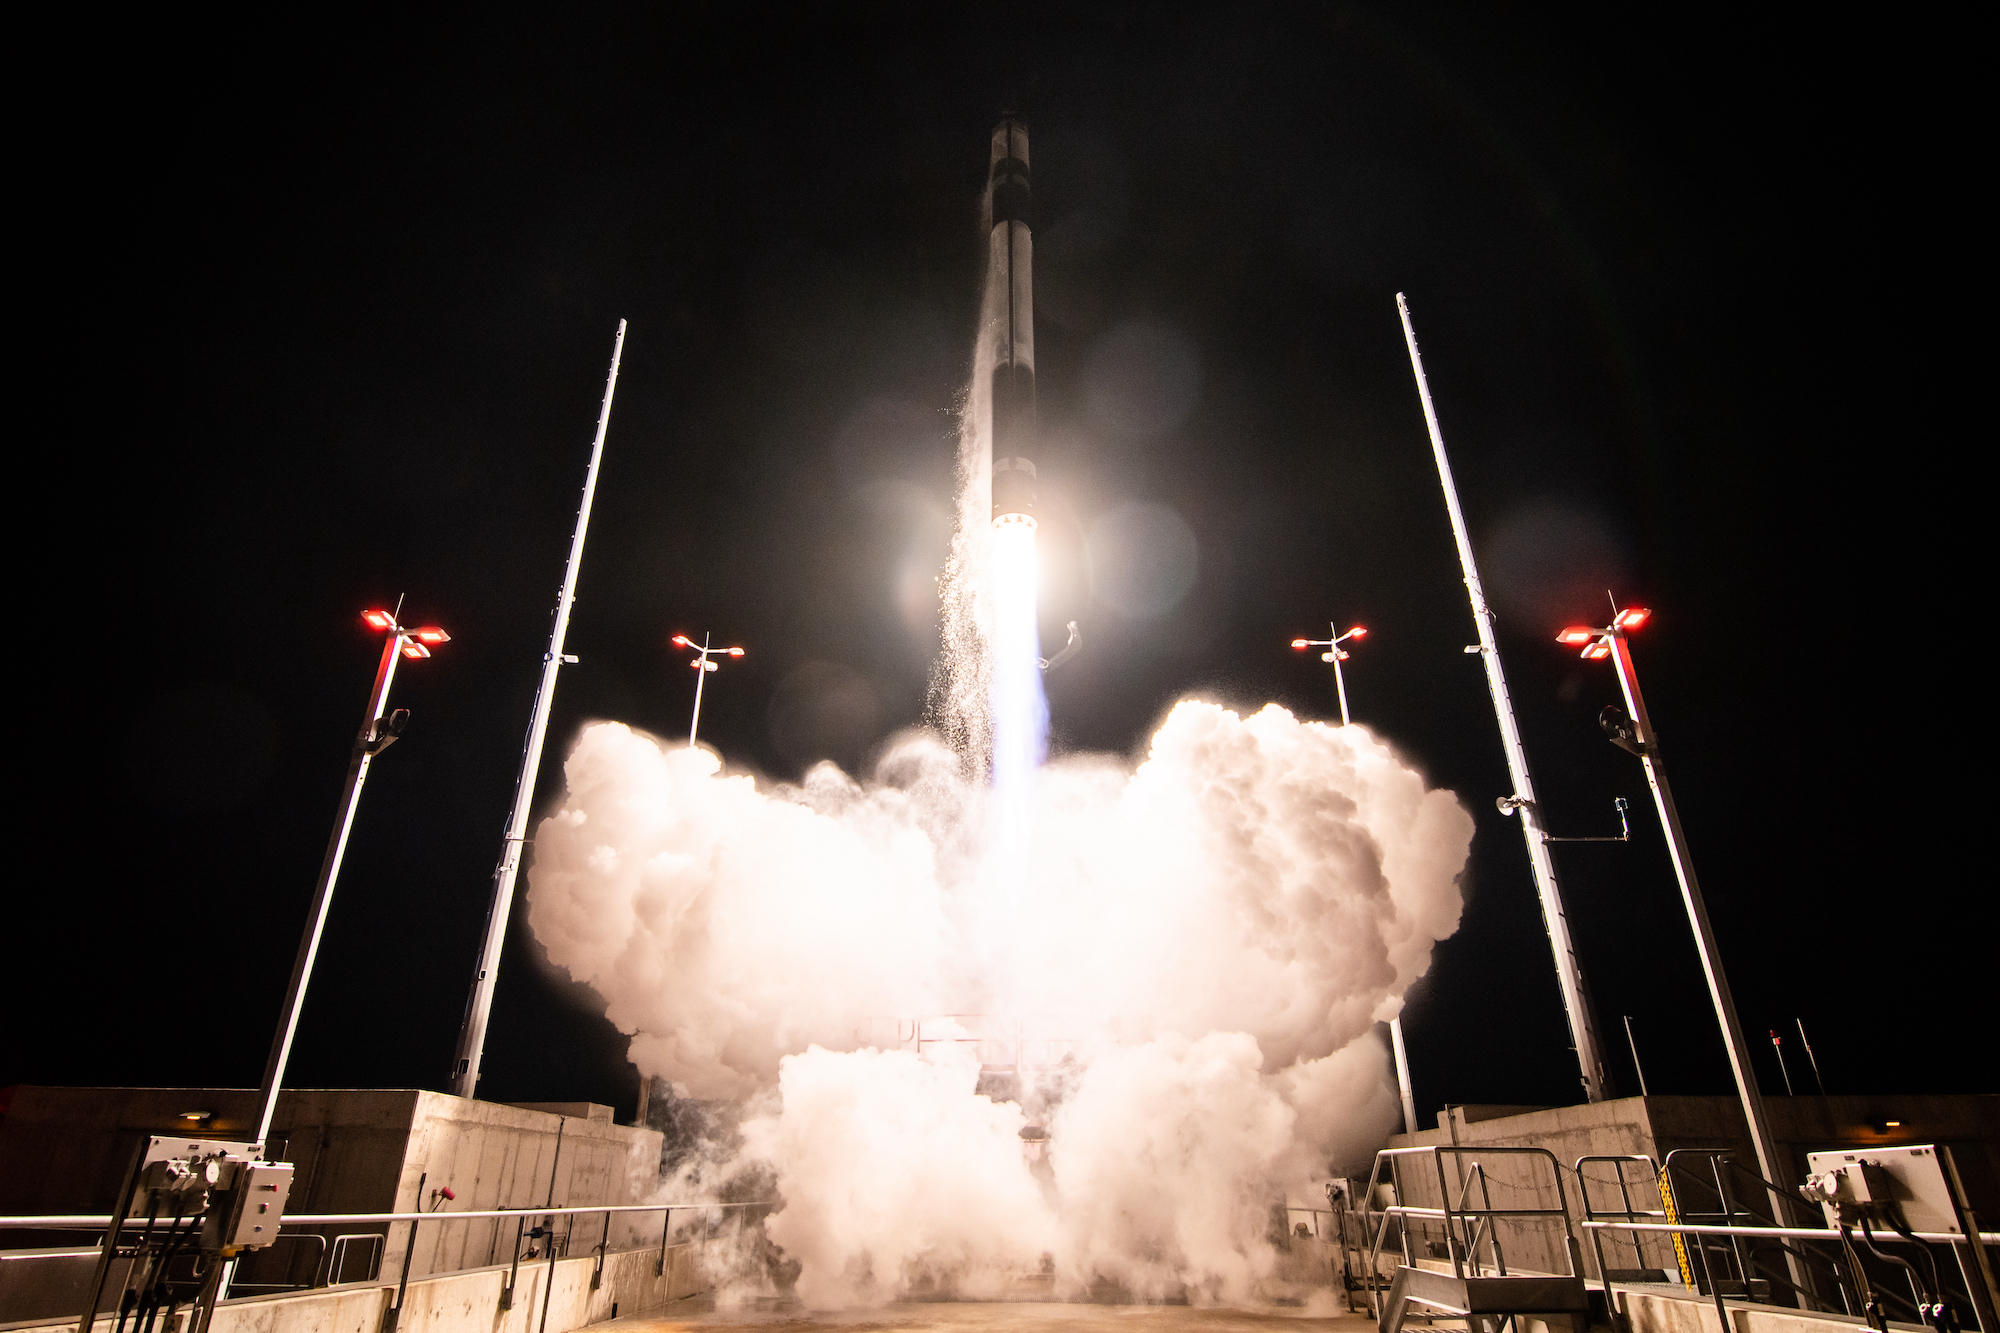 Rocket Lab Electron rocket lifts off from Launch Complex 2 in VIrginia on January 24, 2022. Photo: Rocket Lab/Brady Kenniston 